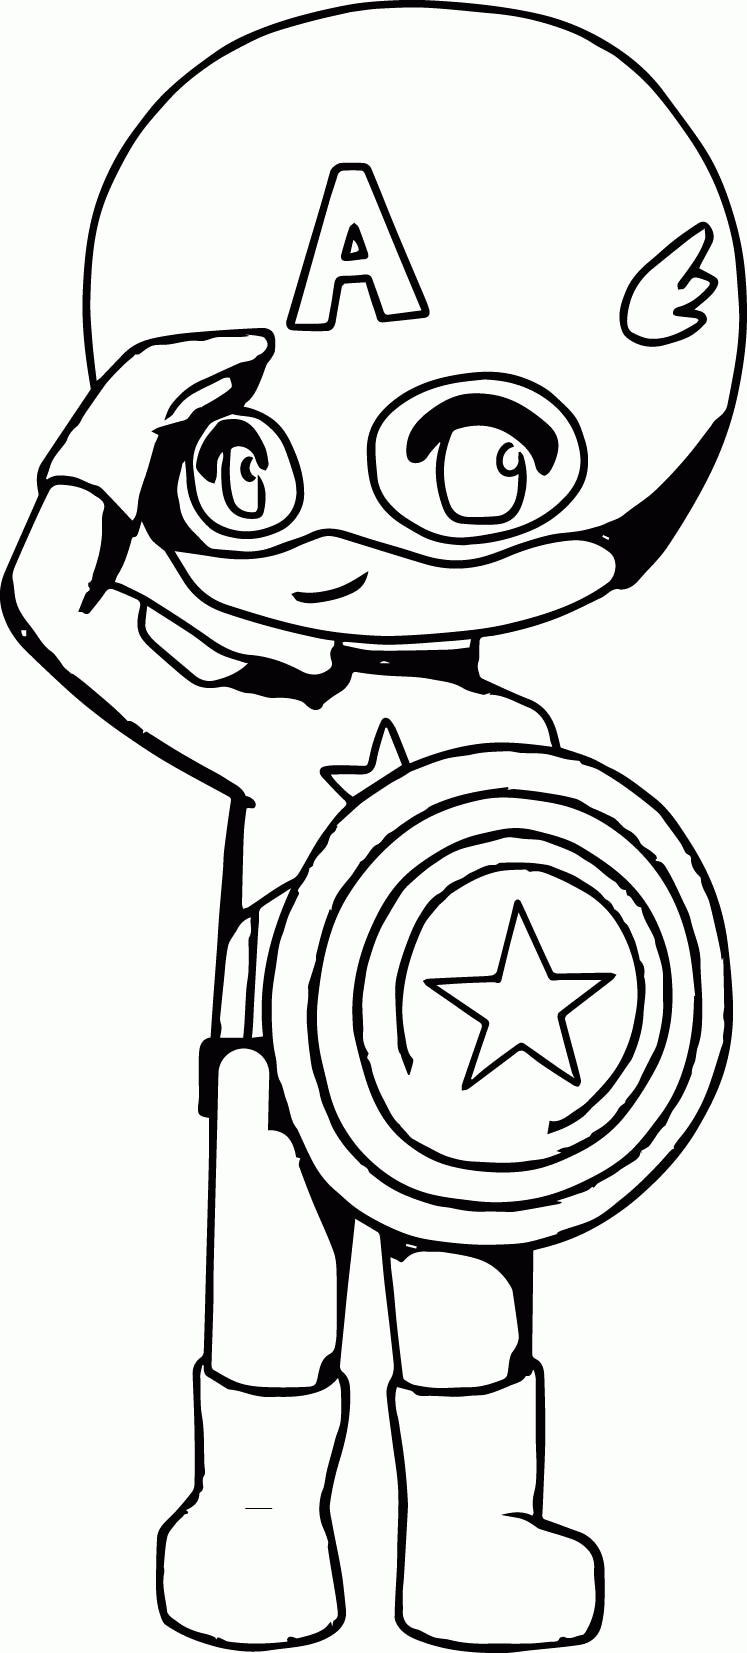 Captain America Face Coloring Pages - Coloring Home